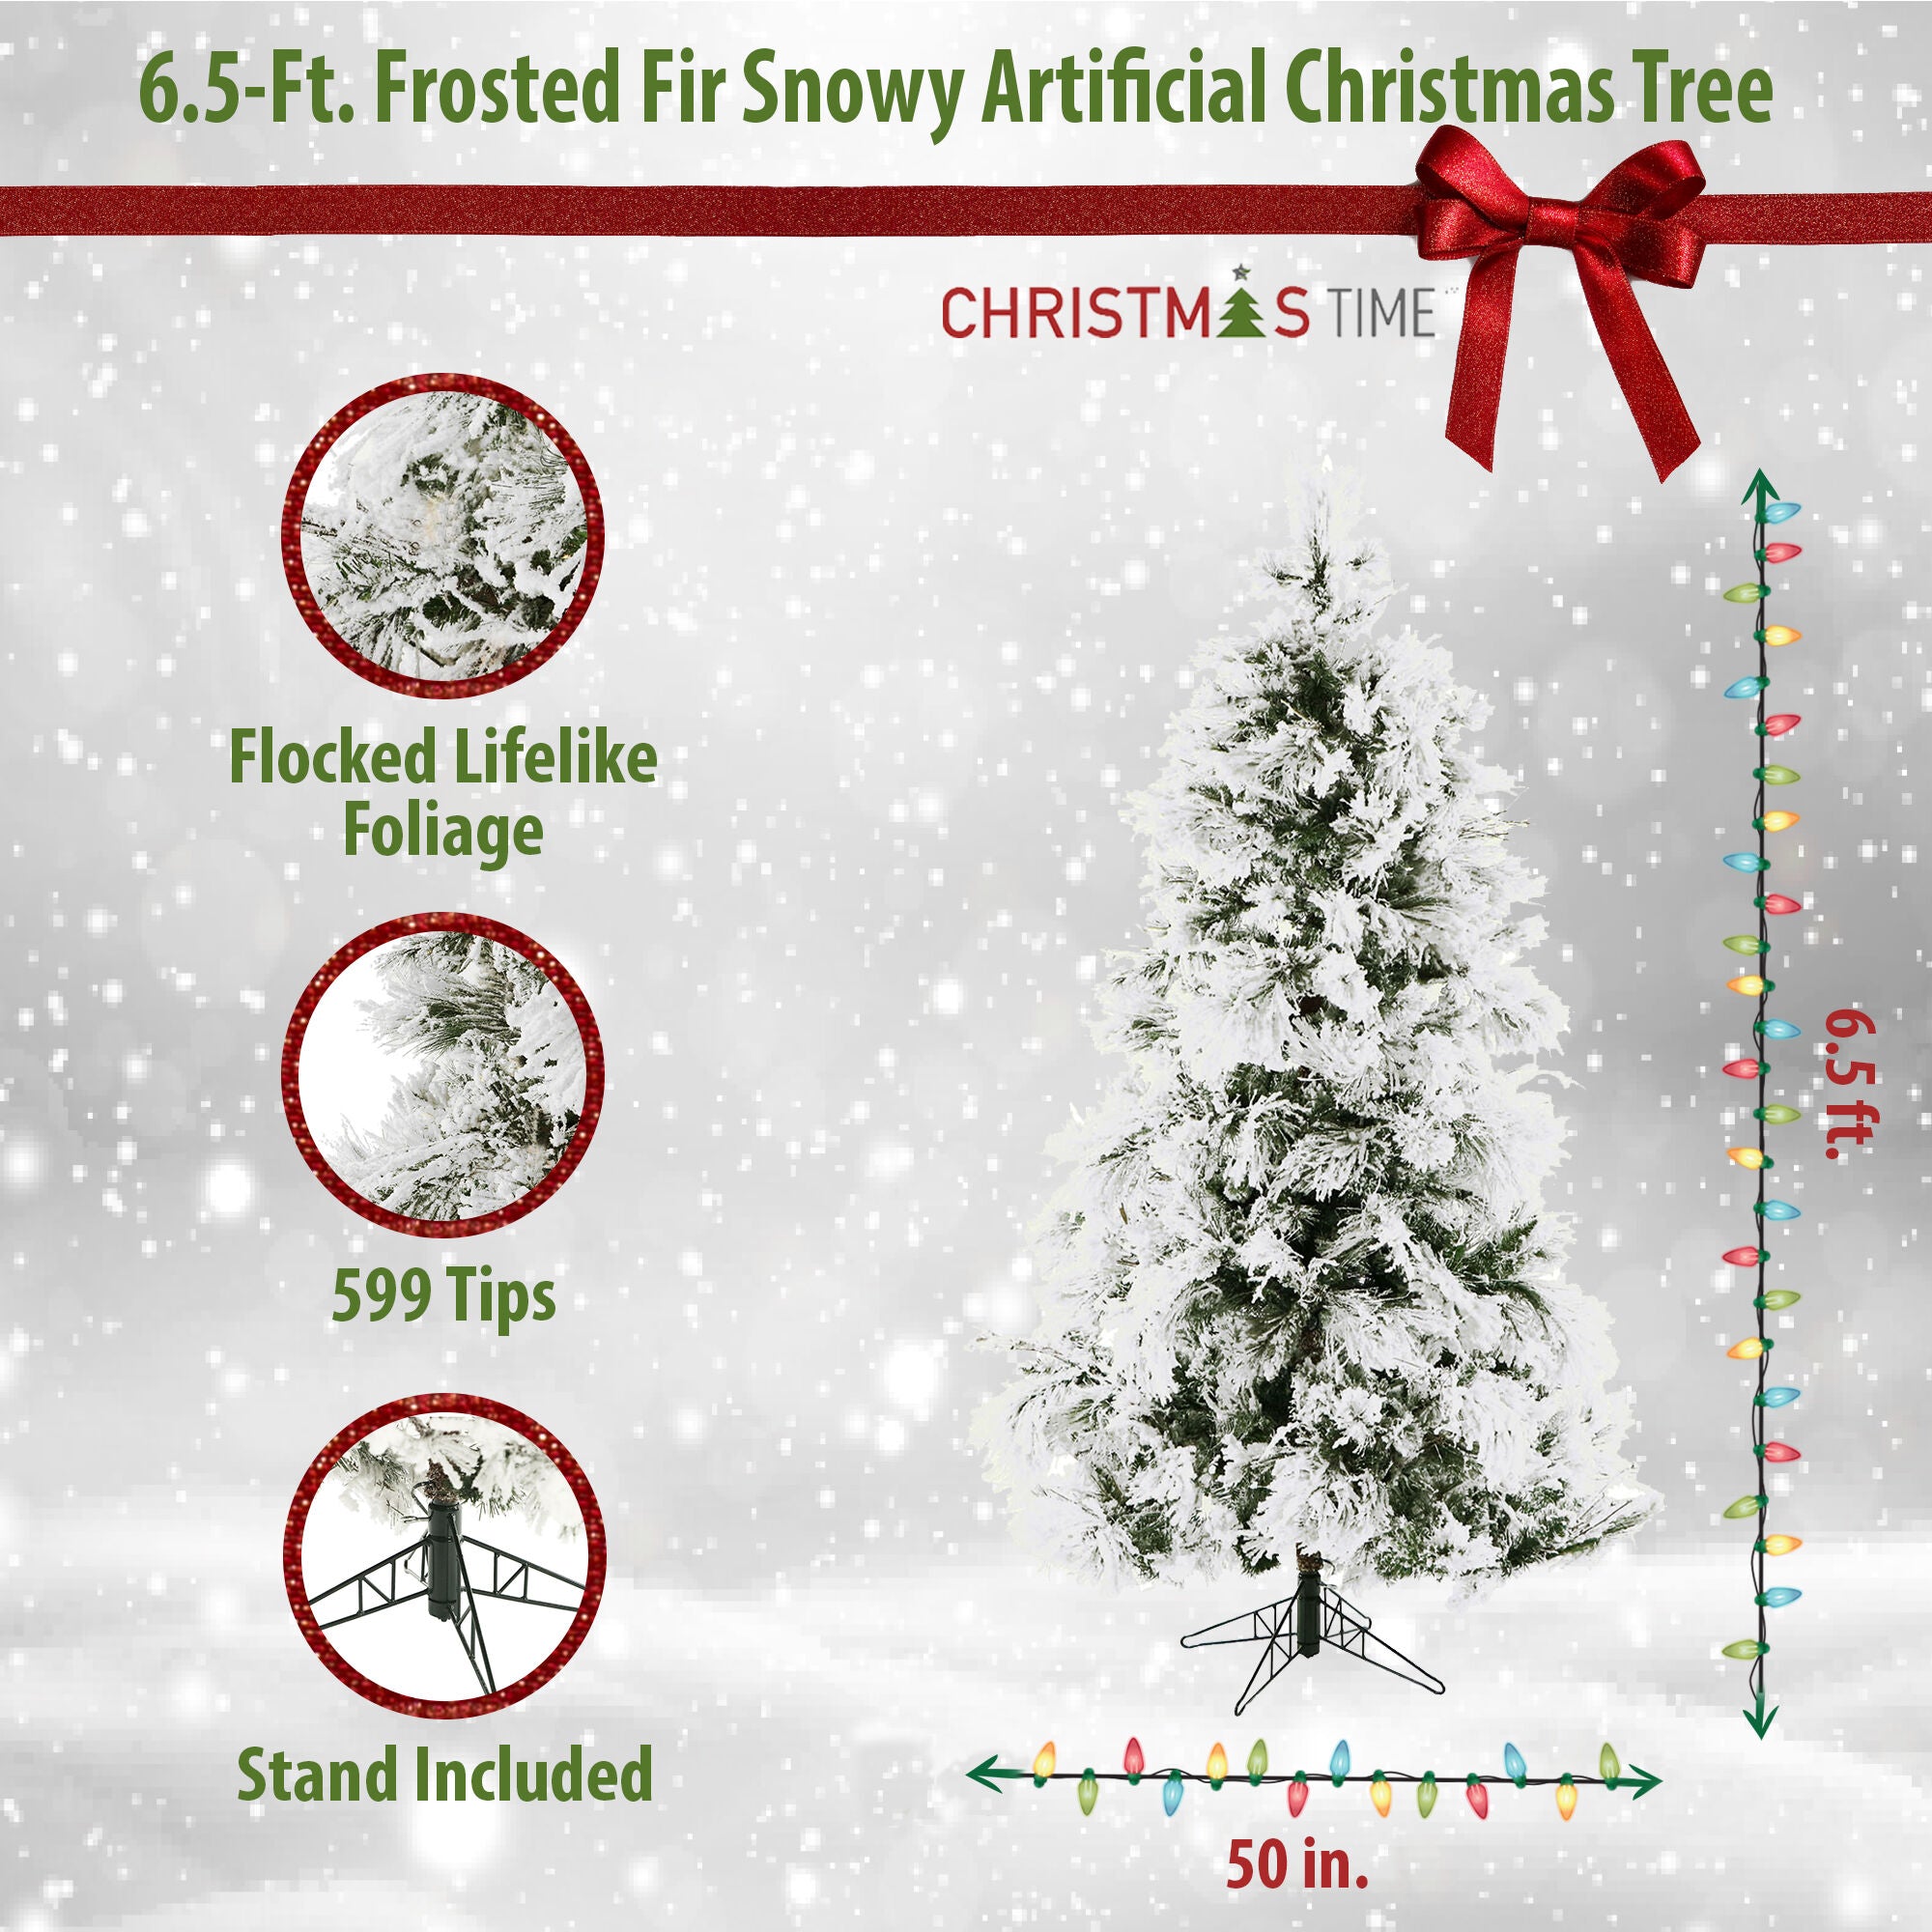 Christmas Time -  6.5-Ft. Frosted Fir Snowy Artificial Christmas Tree